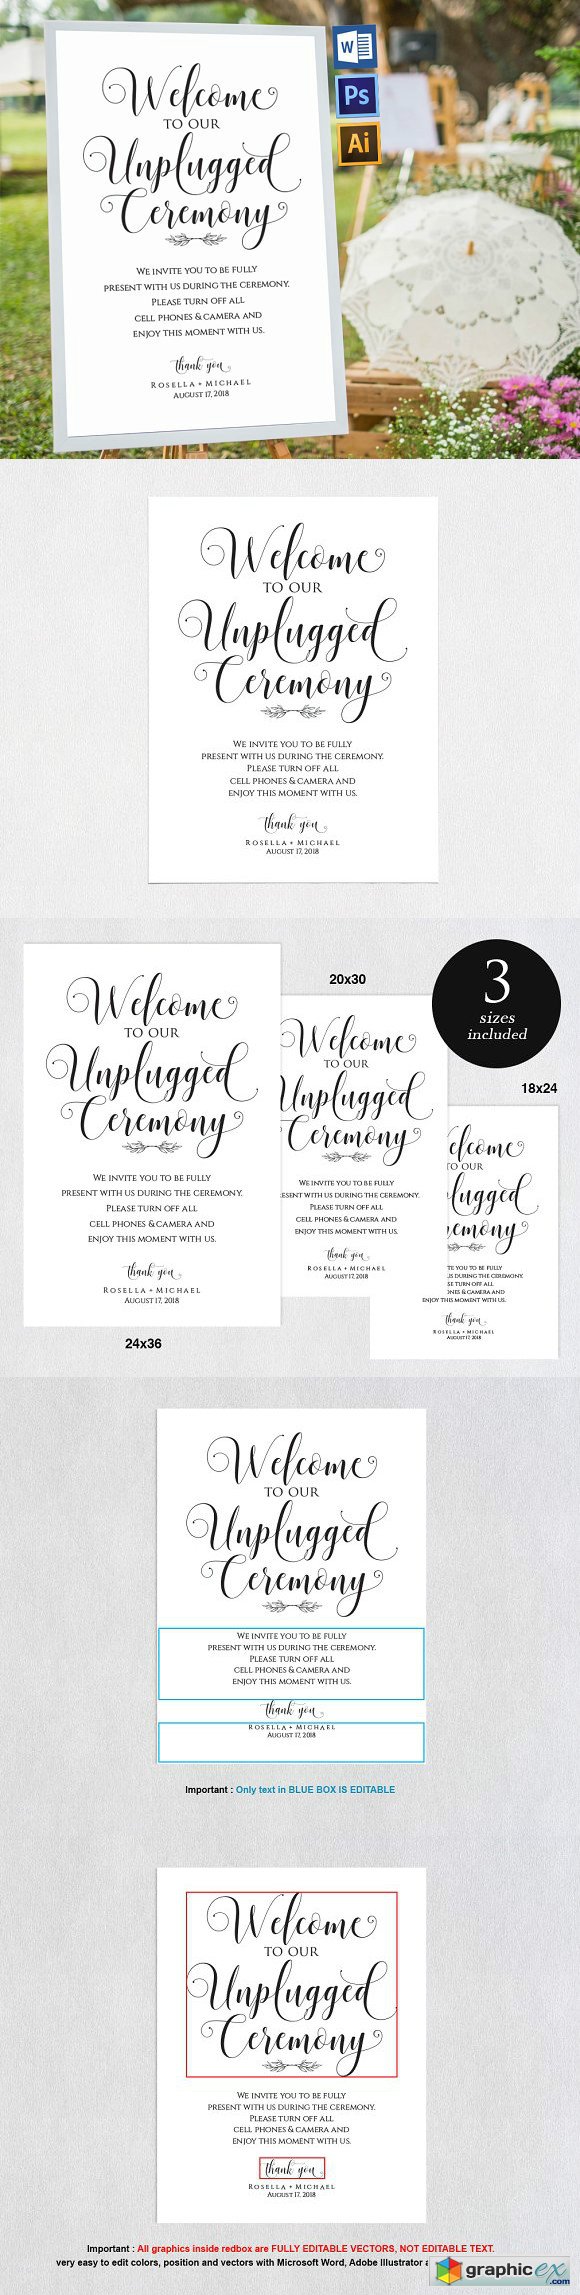 Unplugged wedding sign Wpc355